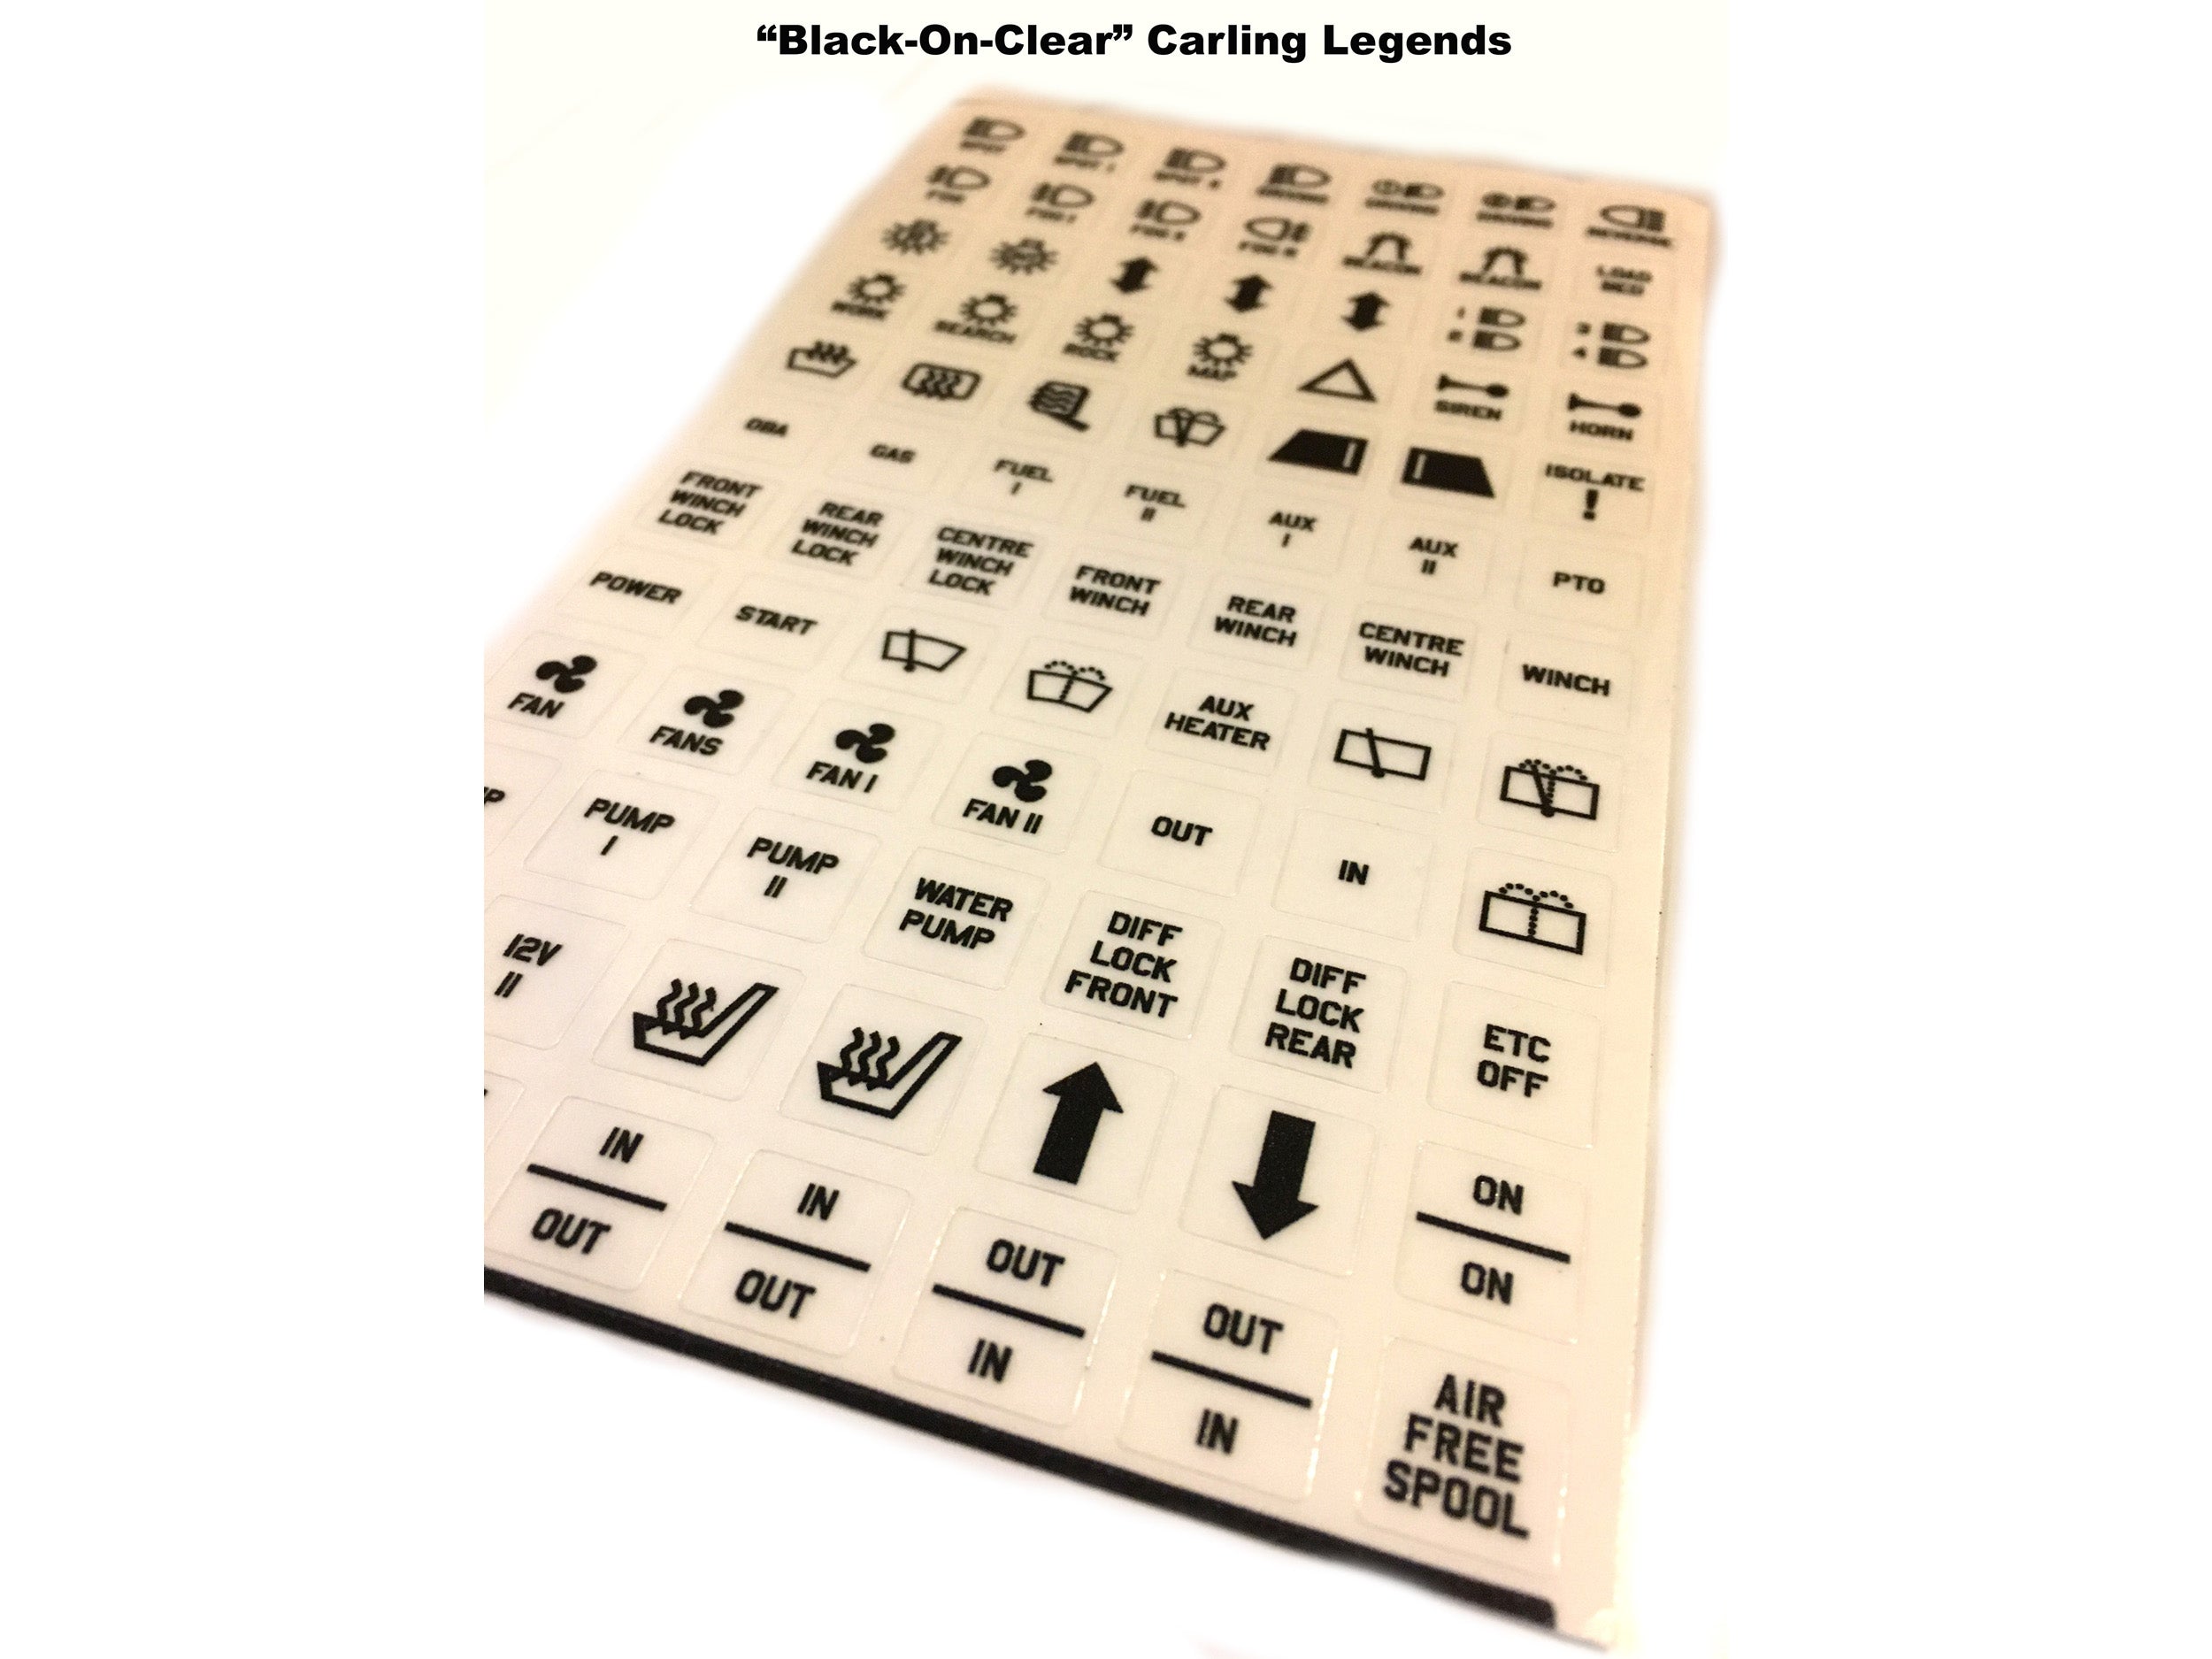 Carling Contura Switch Legends / Decals / Stickers - BLACK-ON-CLEAR background